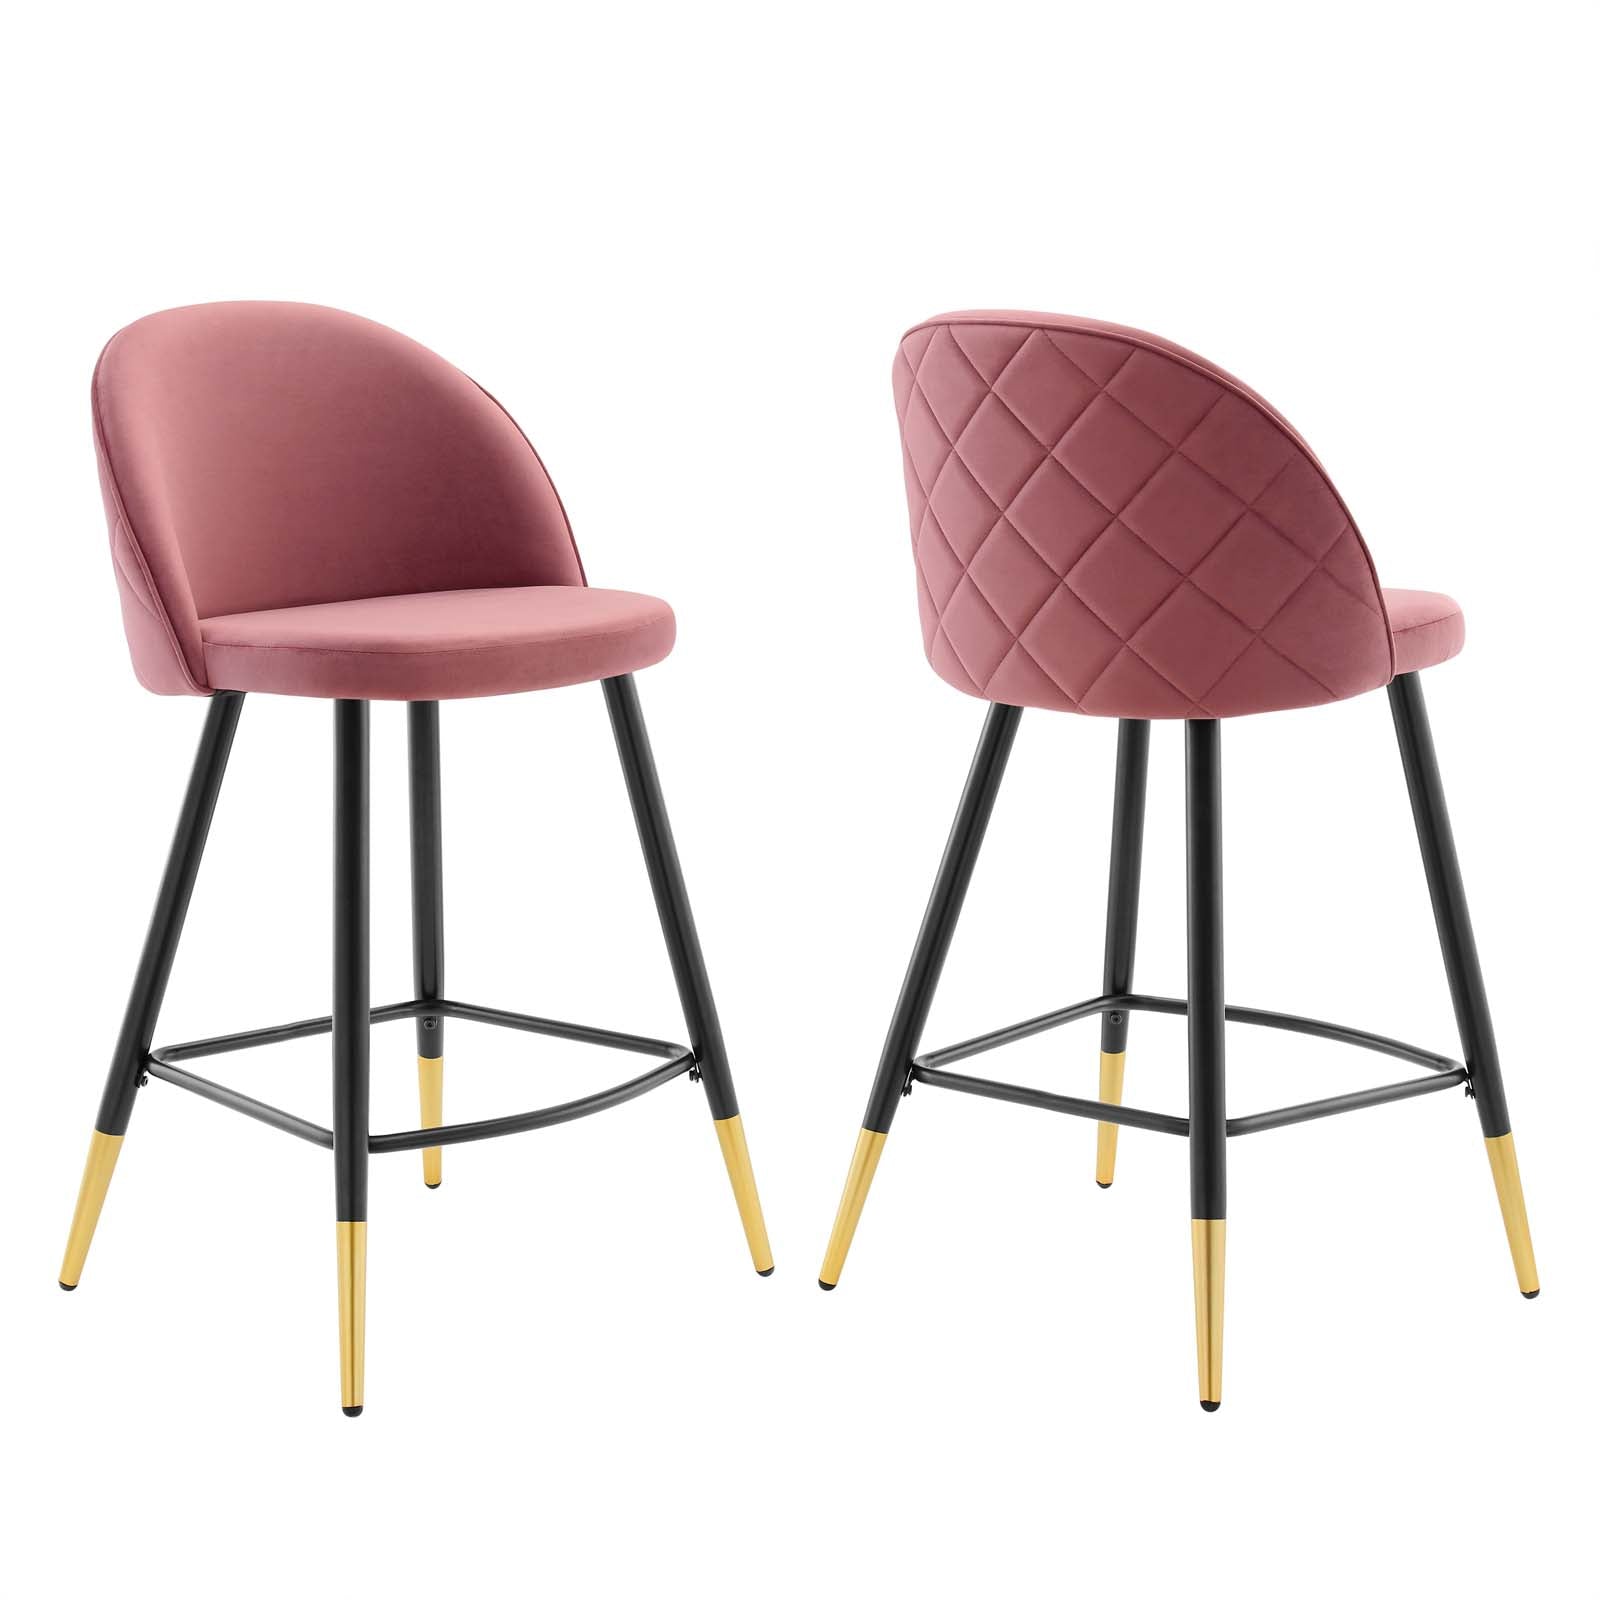 Modway Barstools - Cordial Performance Velvet Counter Stools - Set of 2 Dusty Rose